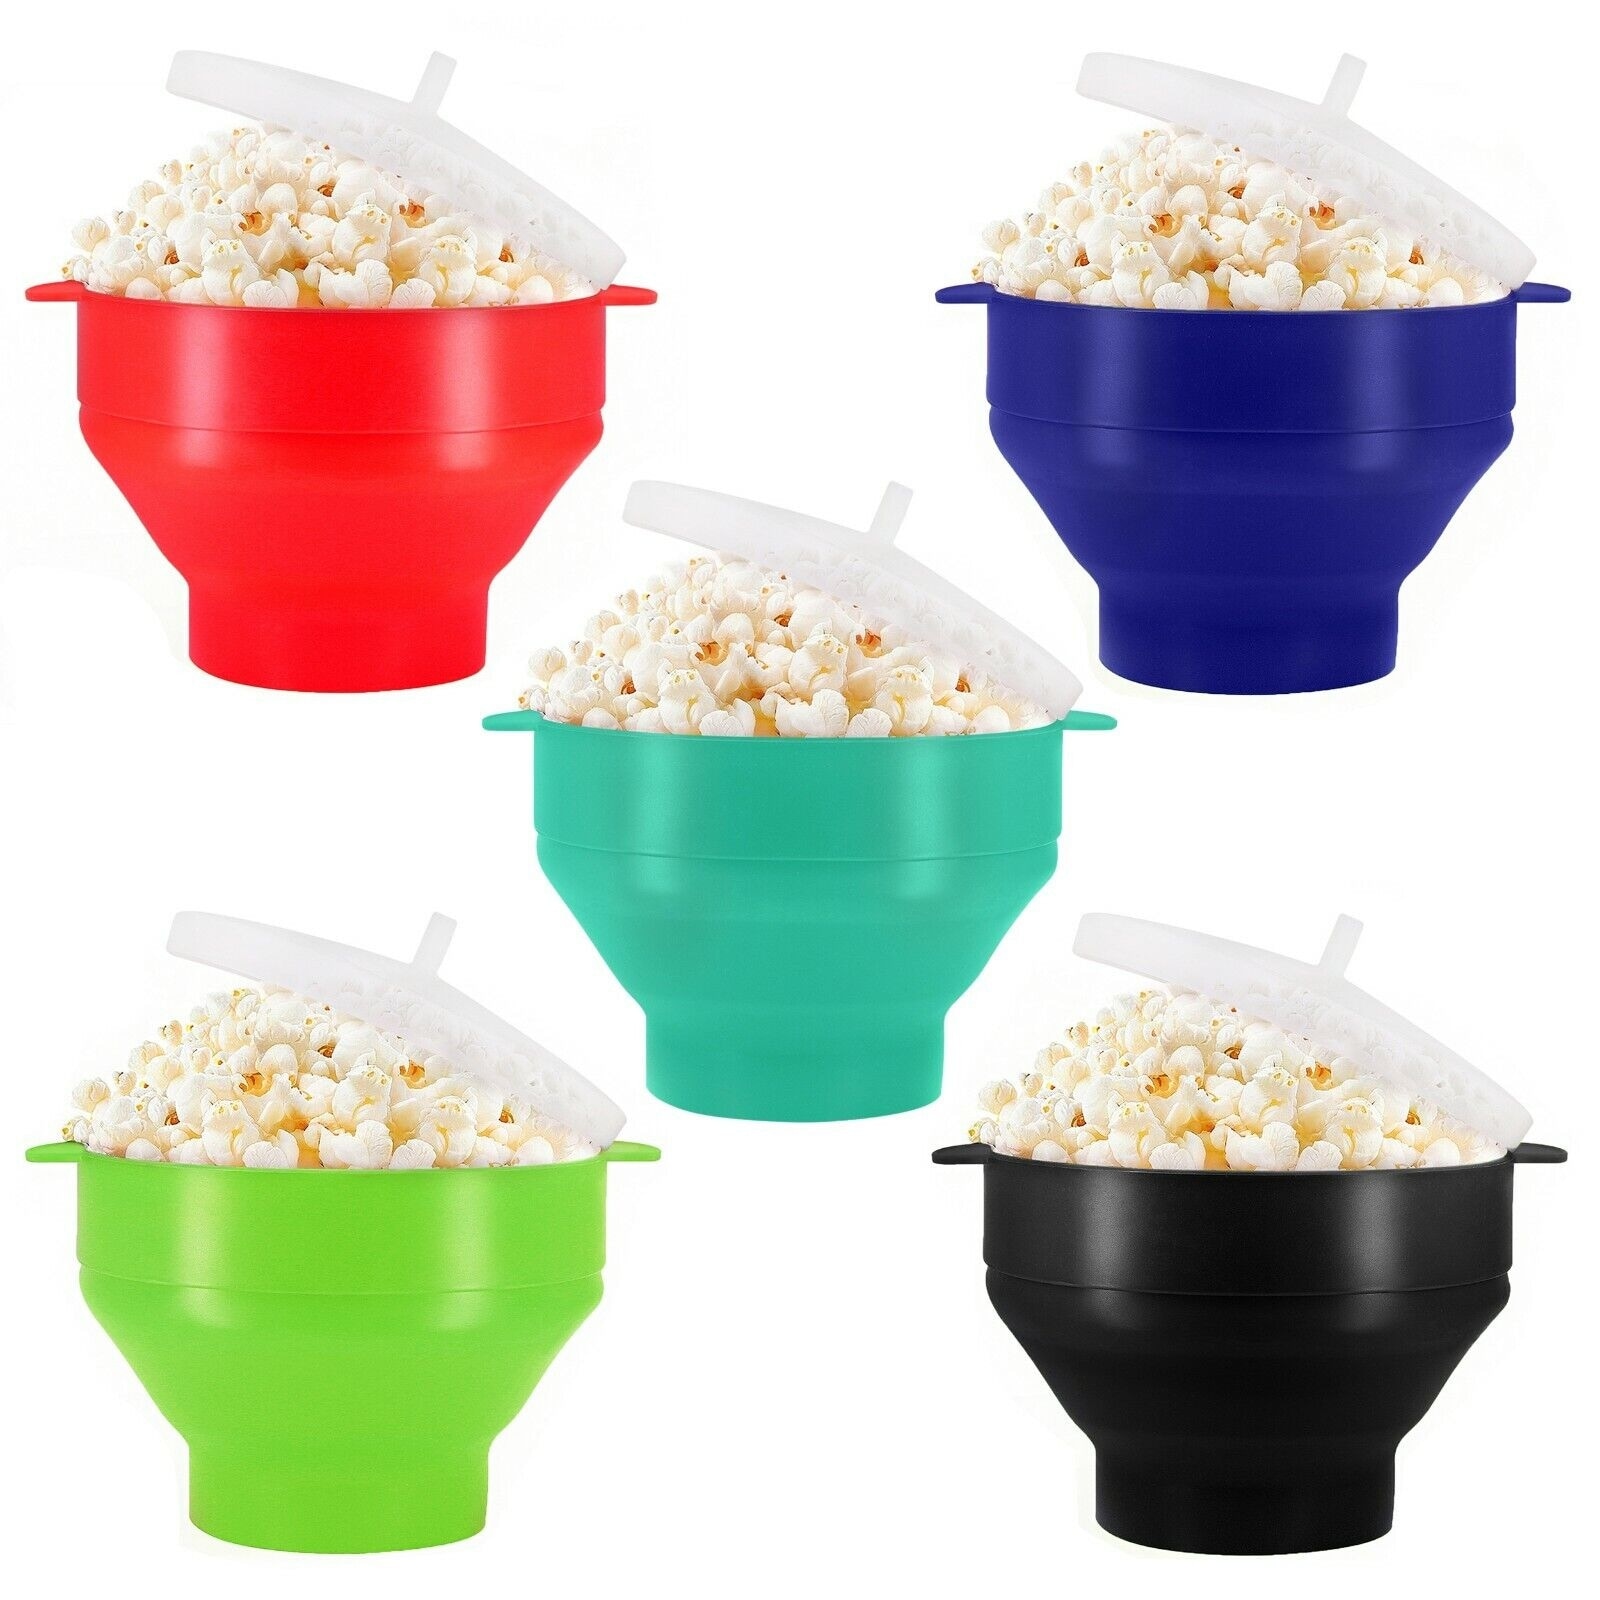 https://ak1.ostkcdn.com/images/products/is/images/direct/de738486a6a188008dd96358a745a92d4370624d/Collapsible-Silicone-Microwave-Popcorn-Popper-Dishwasher-Safe.jpg